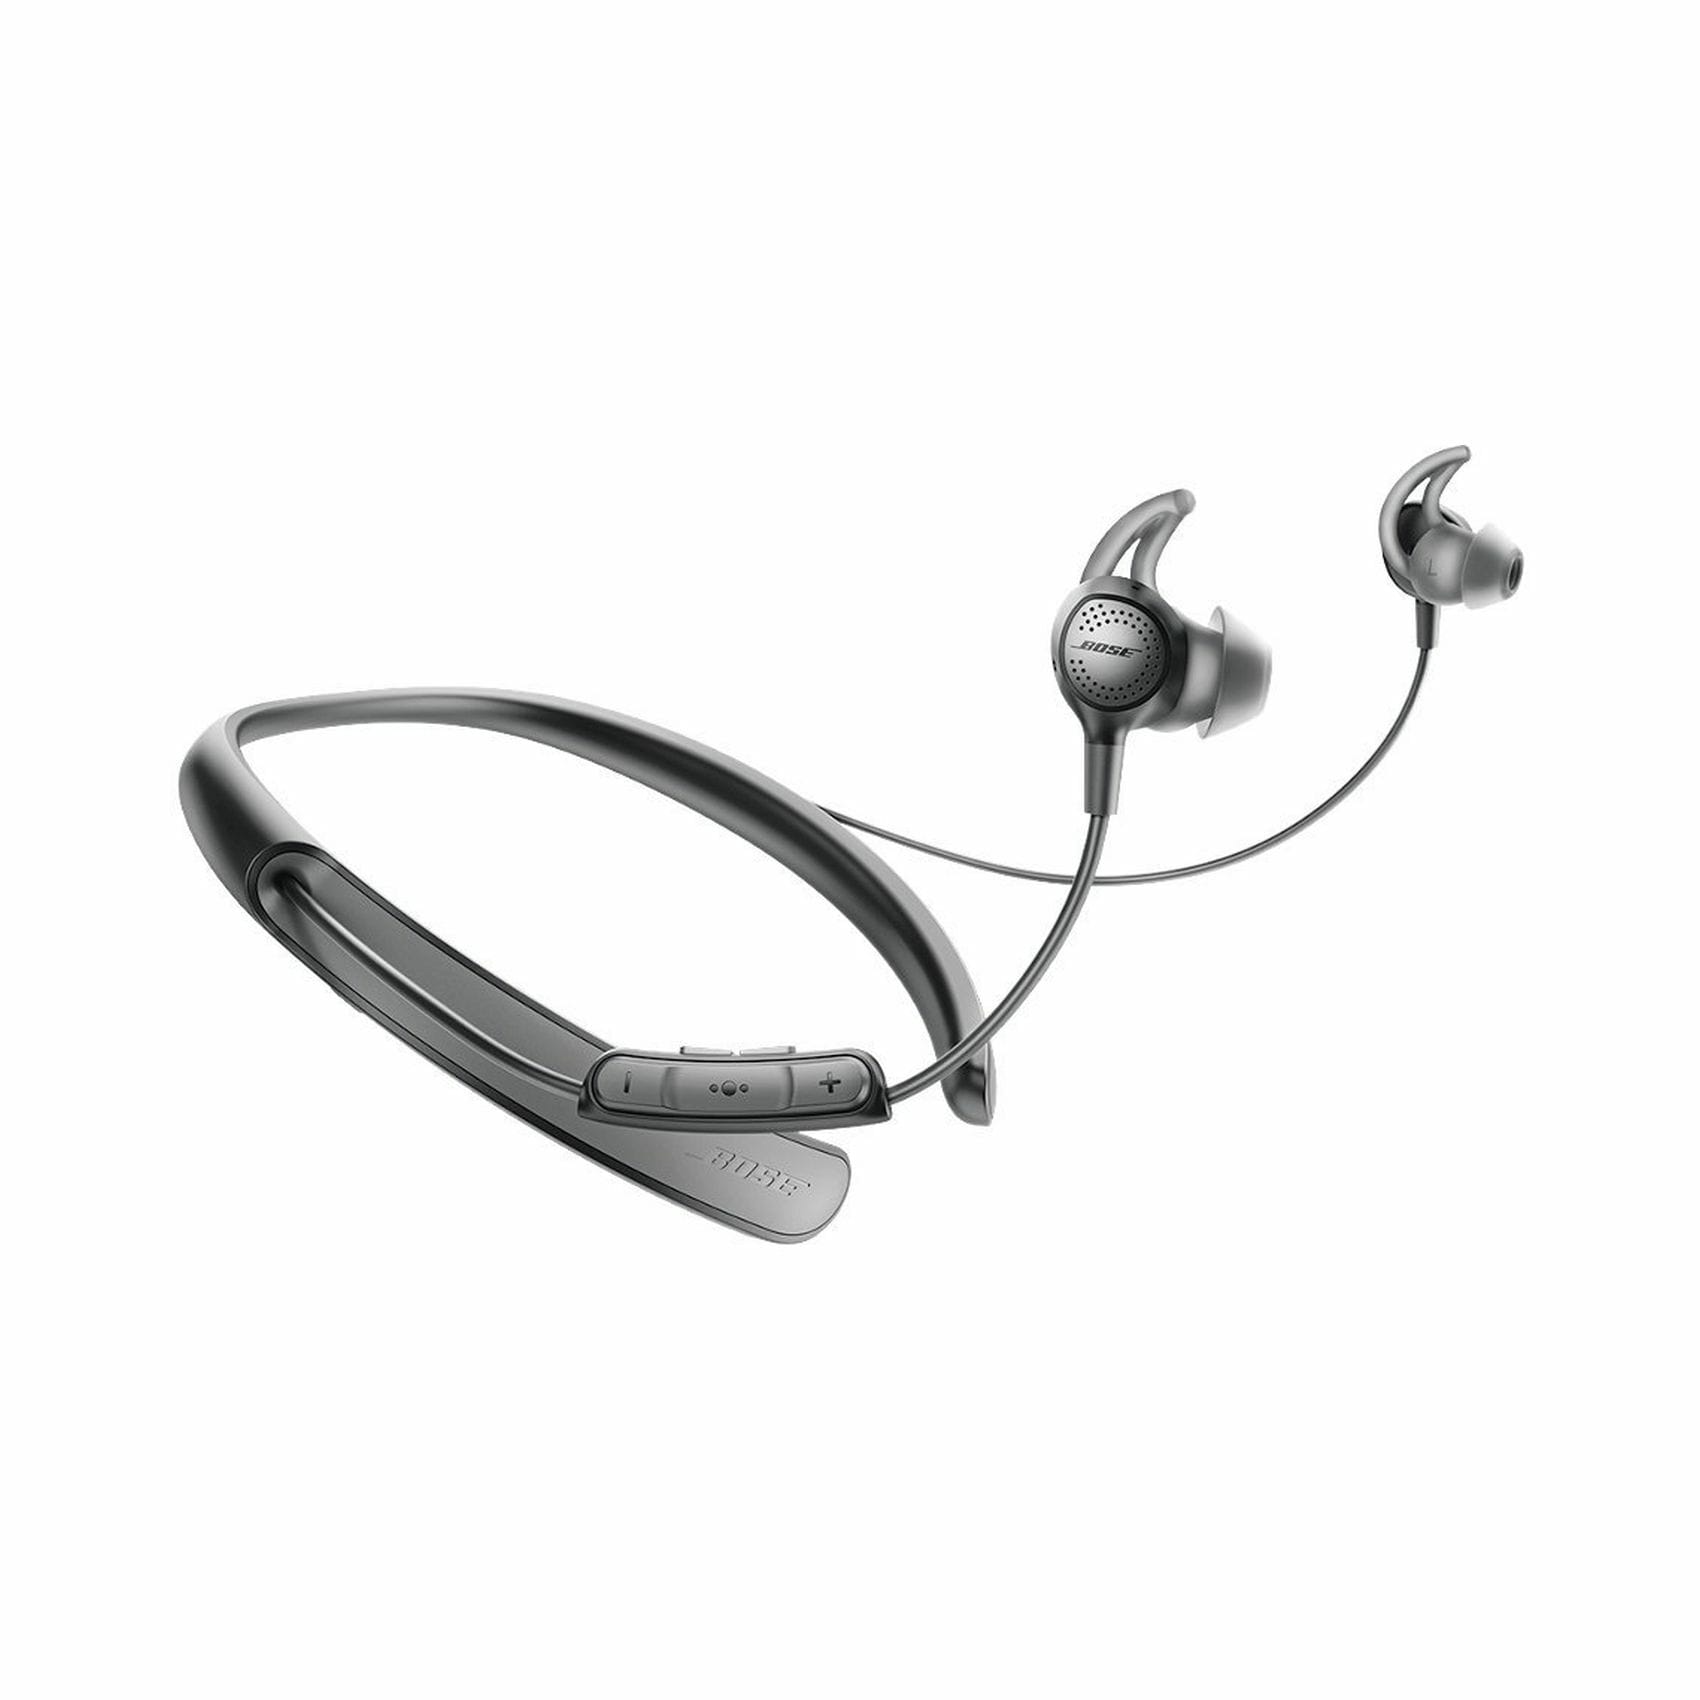 Buy Bose Quietcontrol 30 Wireless In Ear Headphone With Mic Black Online Shop Smartphones Tablets Wearables On Carrefour Uae